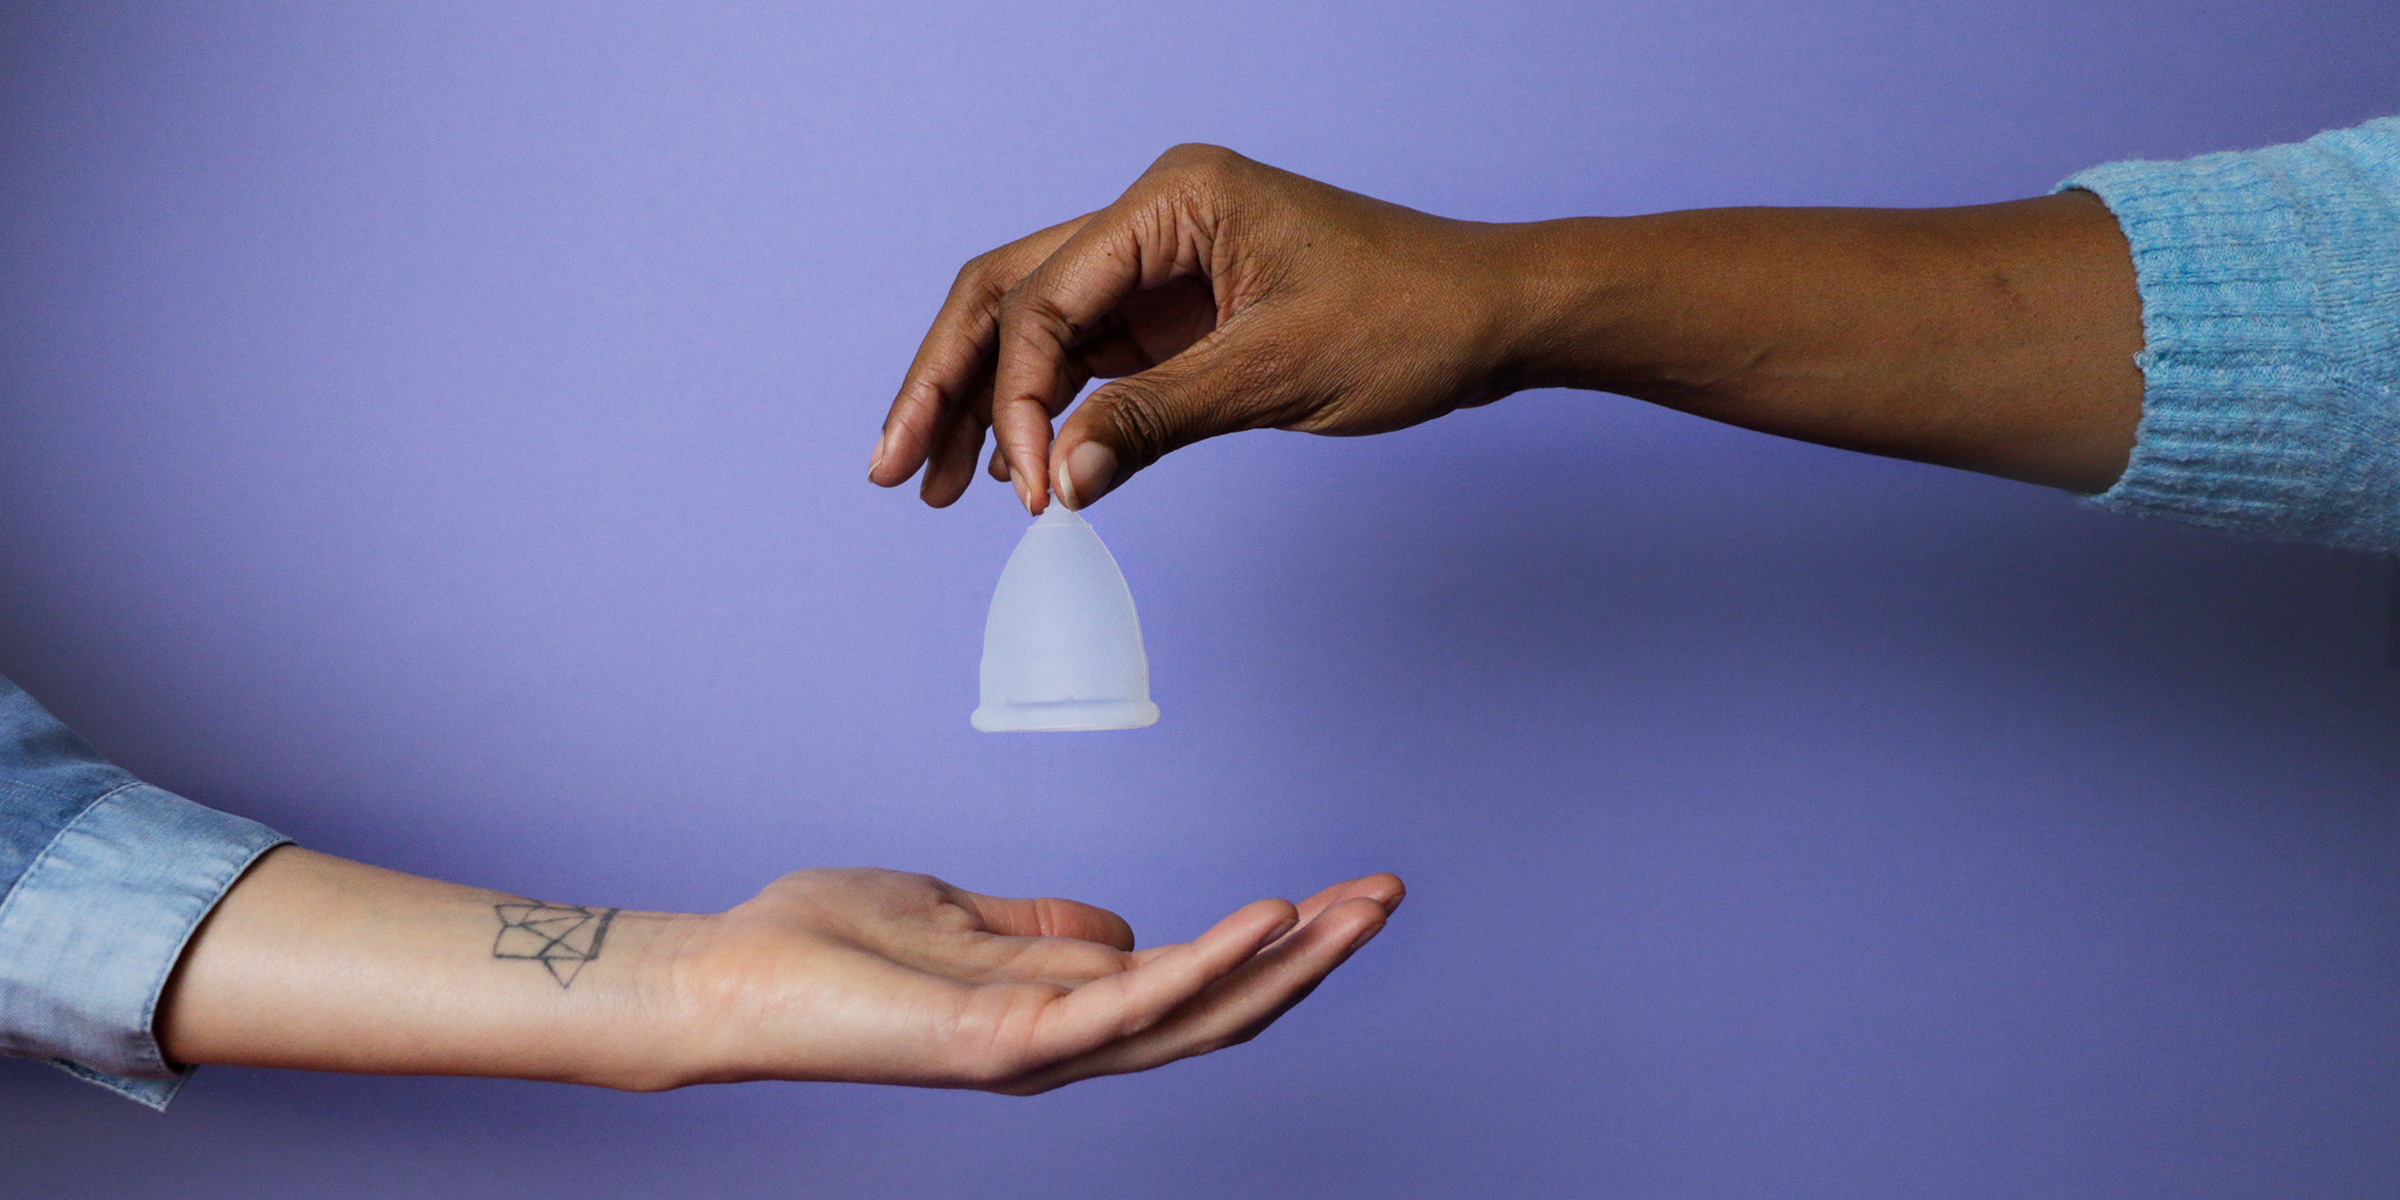 Shecup - How To Use Menstrual Cup?